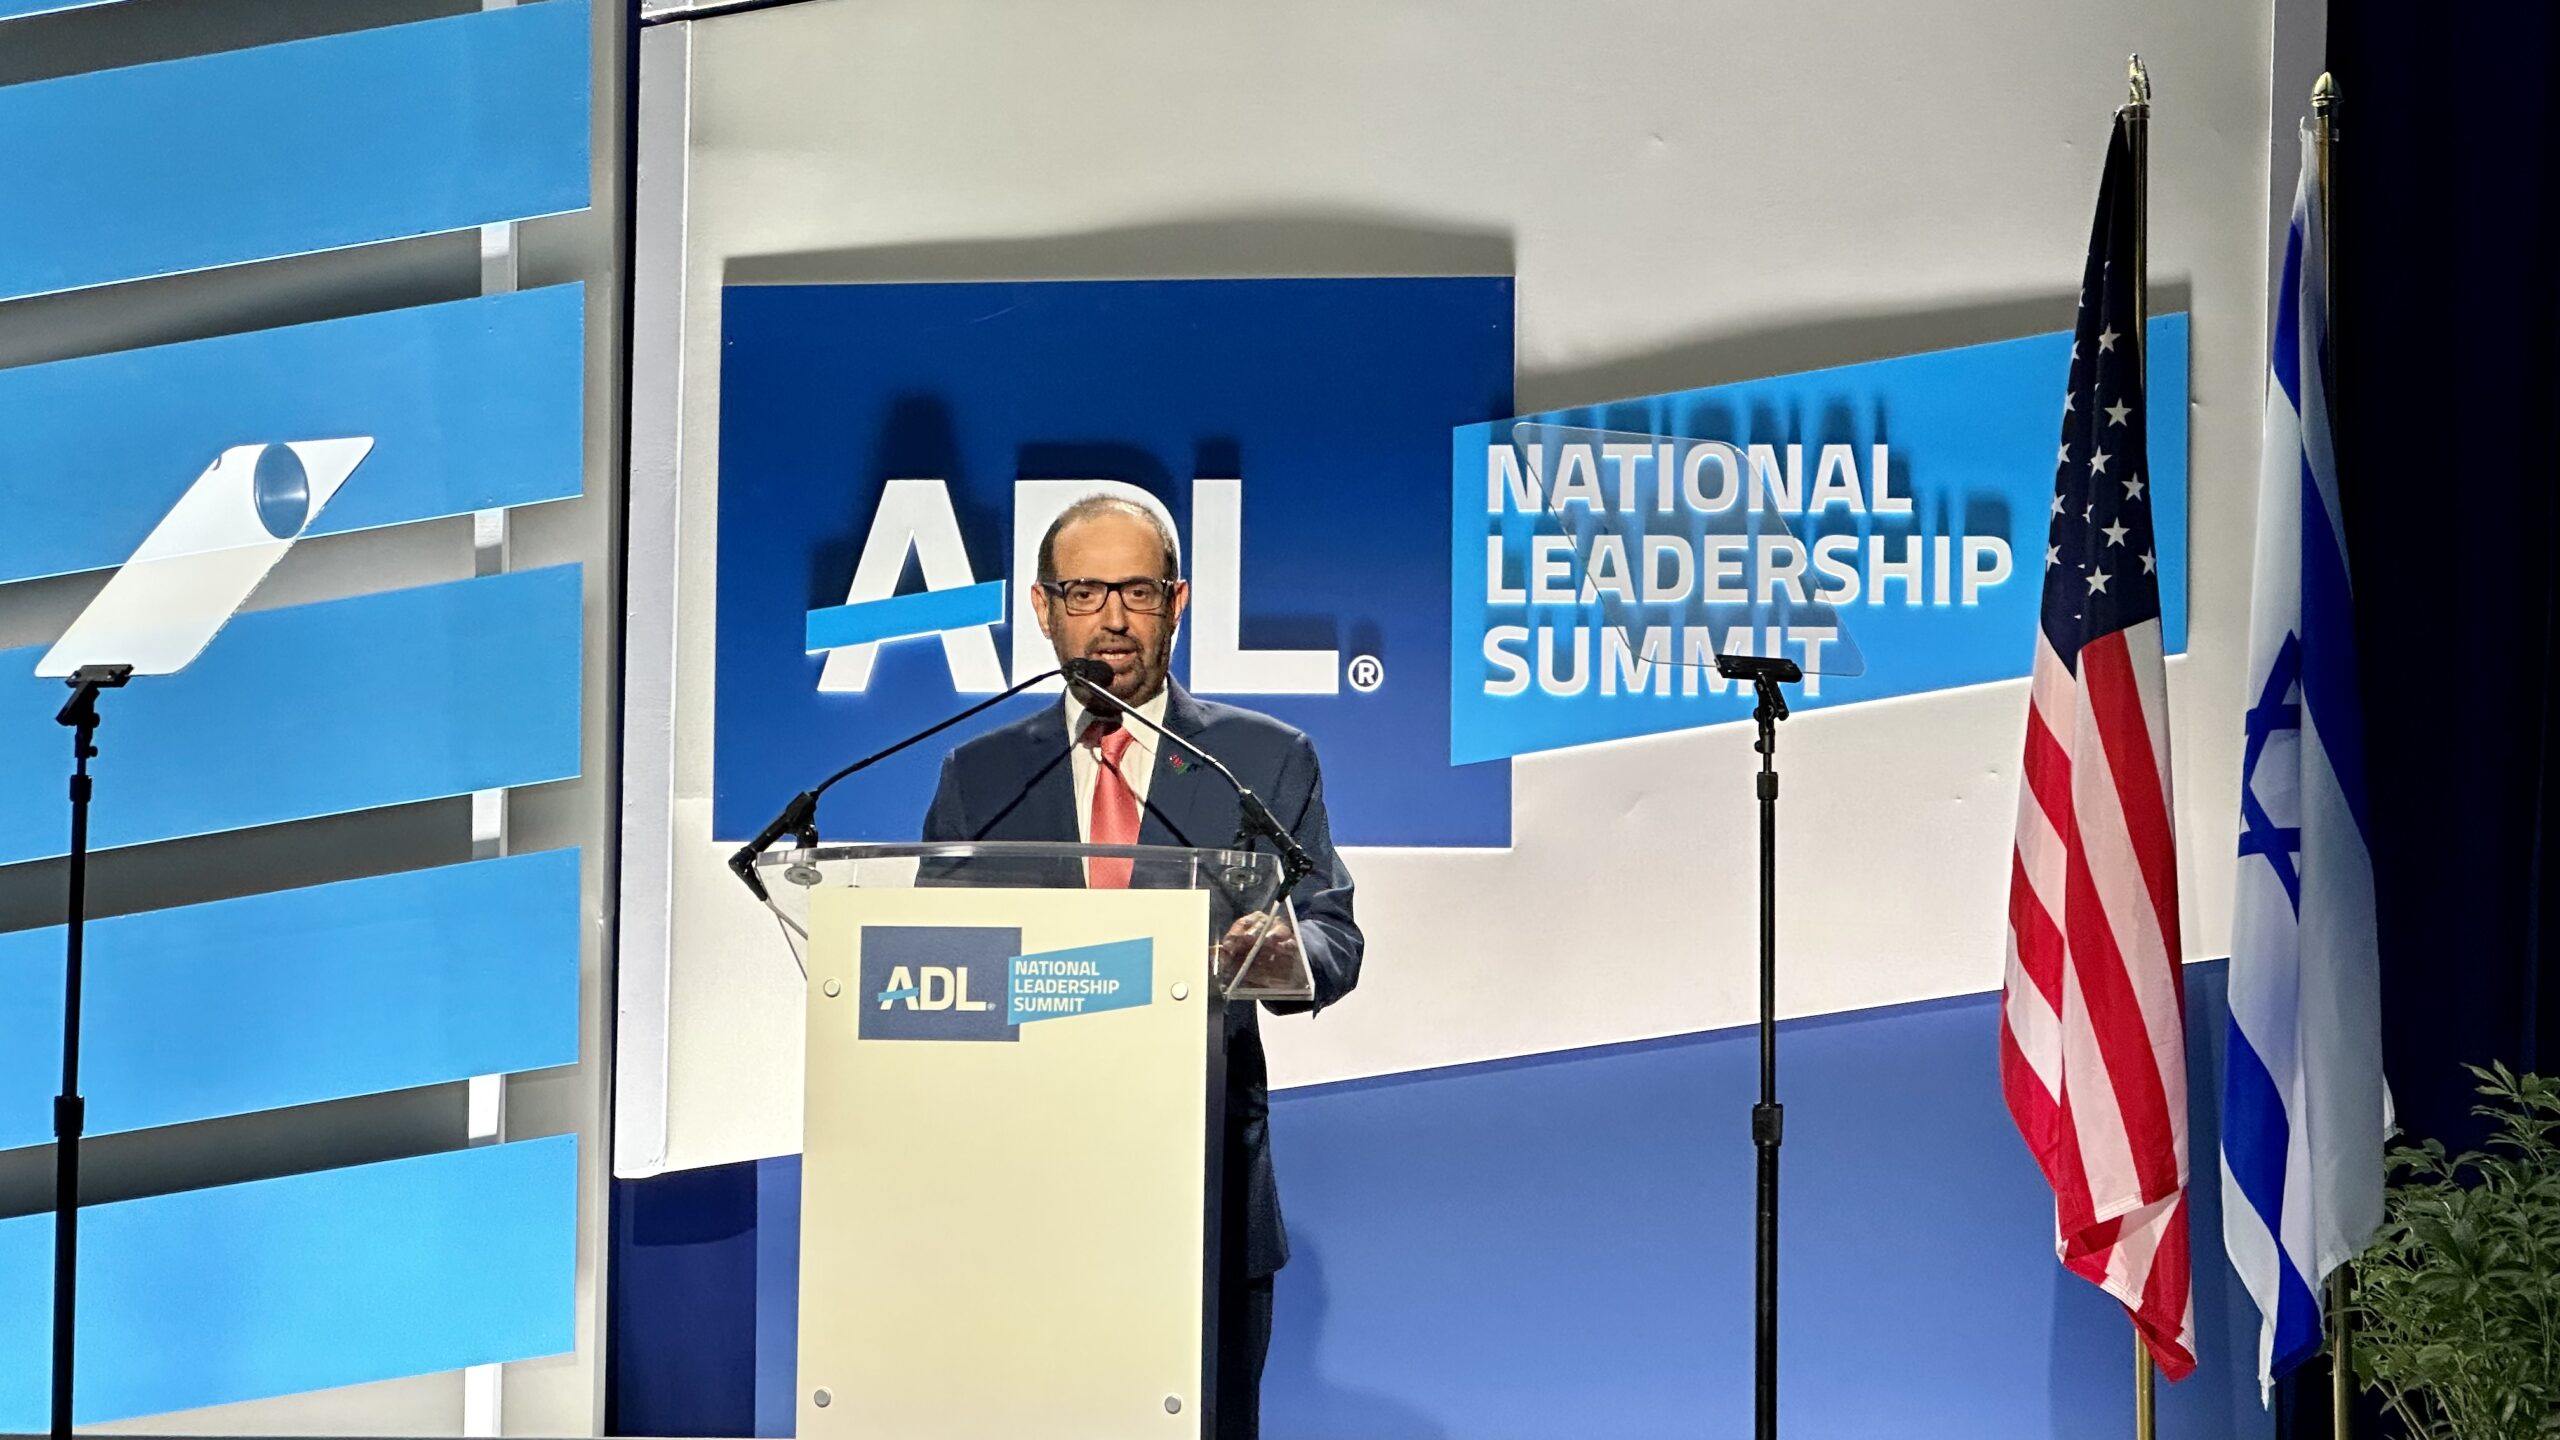 Dr Ali Tells ADL Leadership Summit: UAE Leads With Courage To Fight Hate 